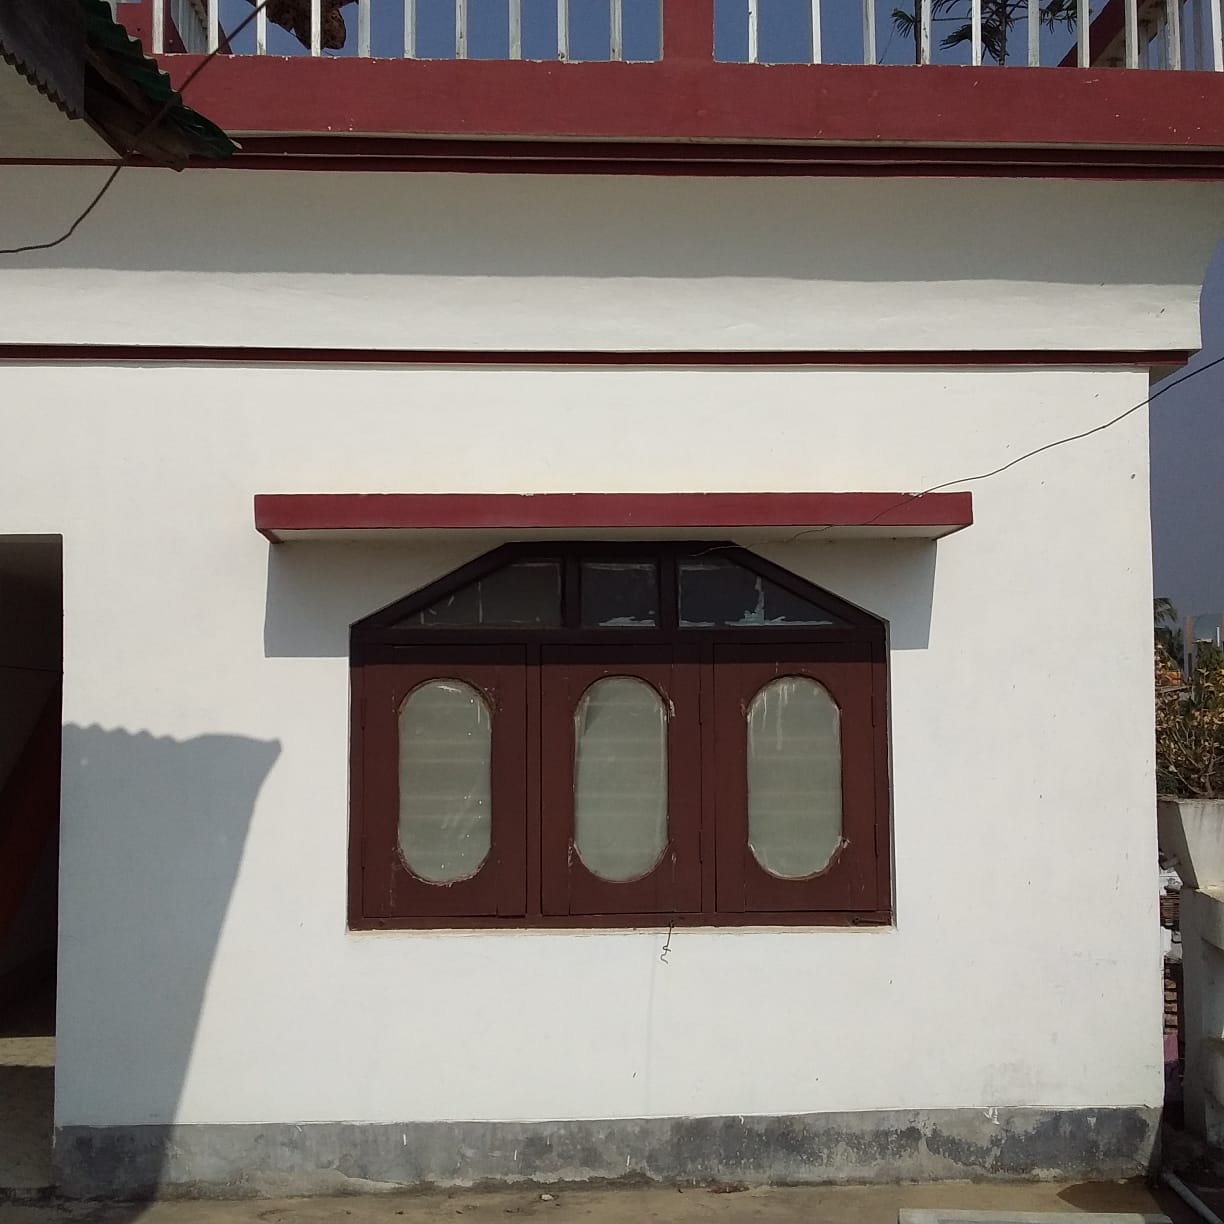 Welcome to Tripura Property Sale / Purchase / Rental Services